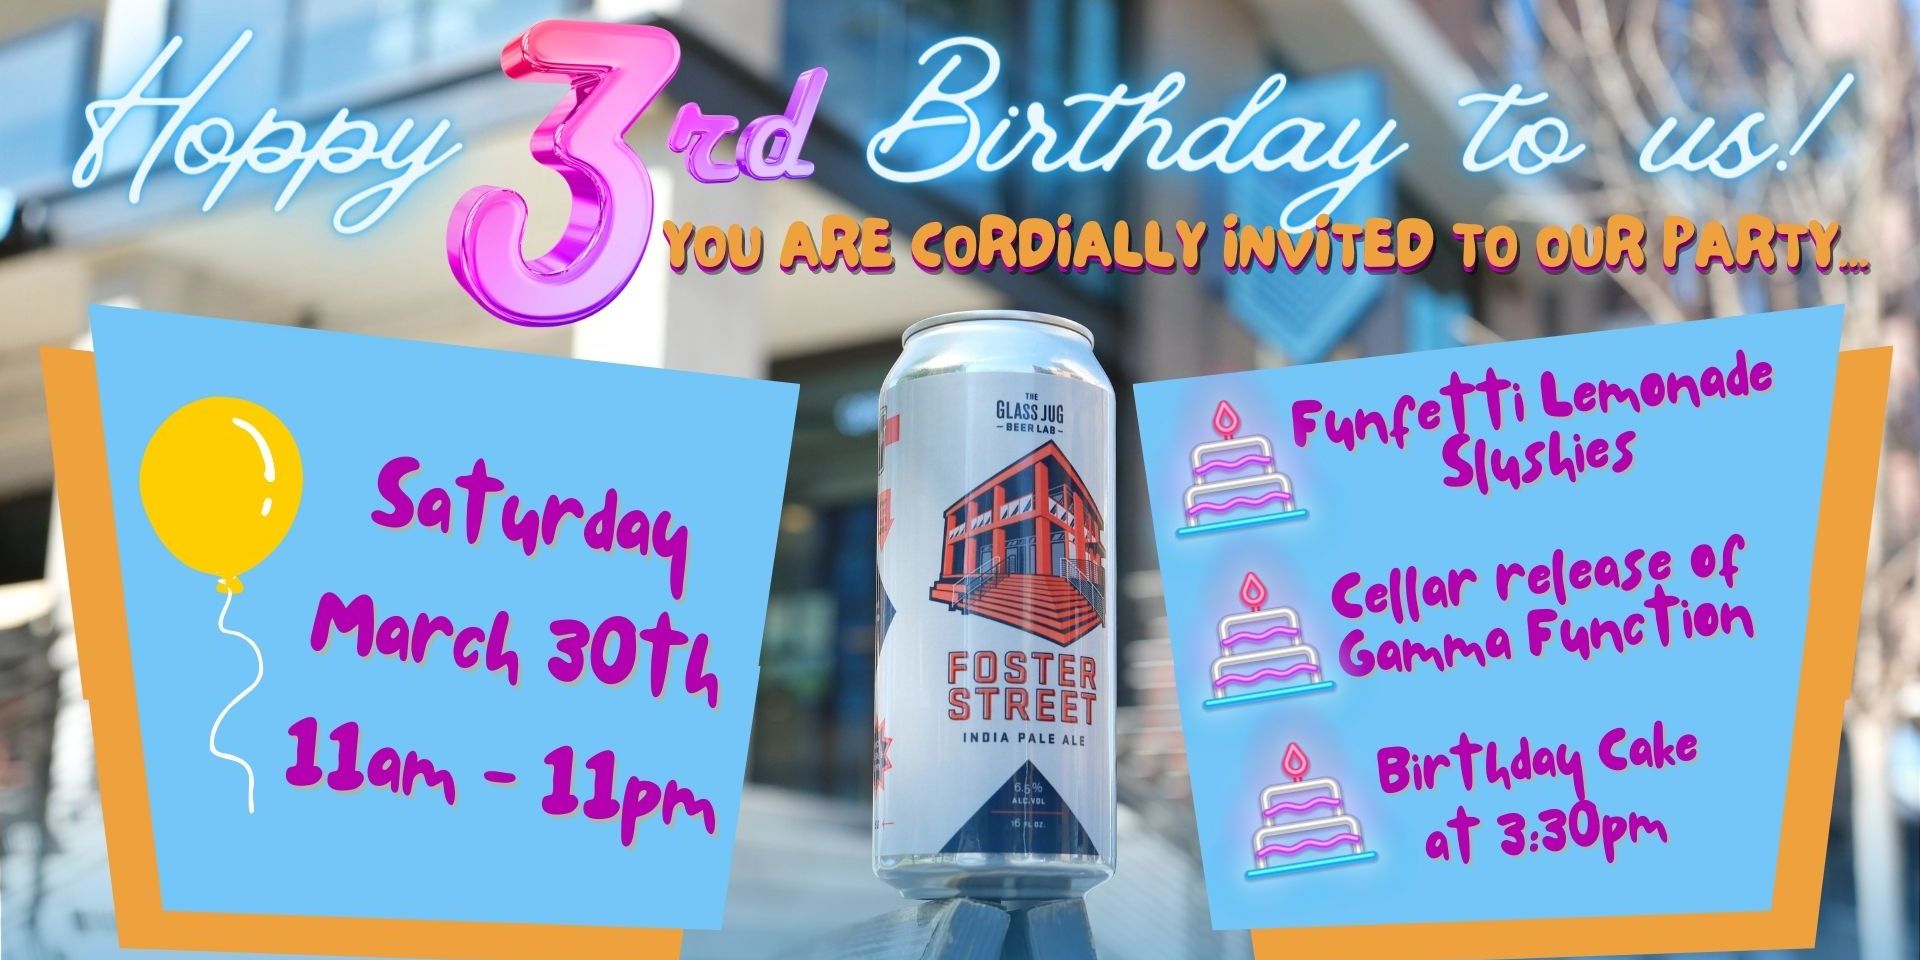 Glass Jug Downtown's 3rd Birthday Party promotional image